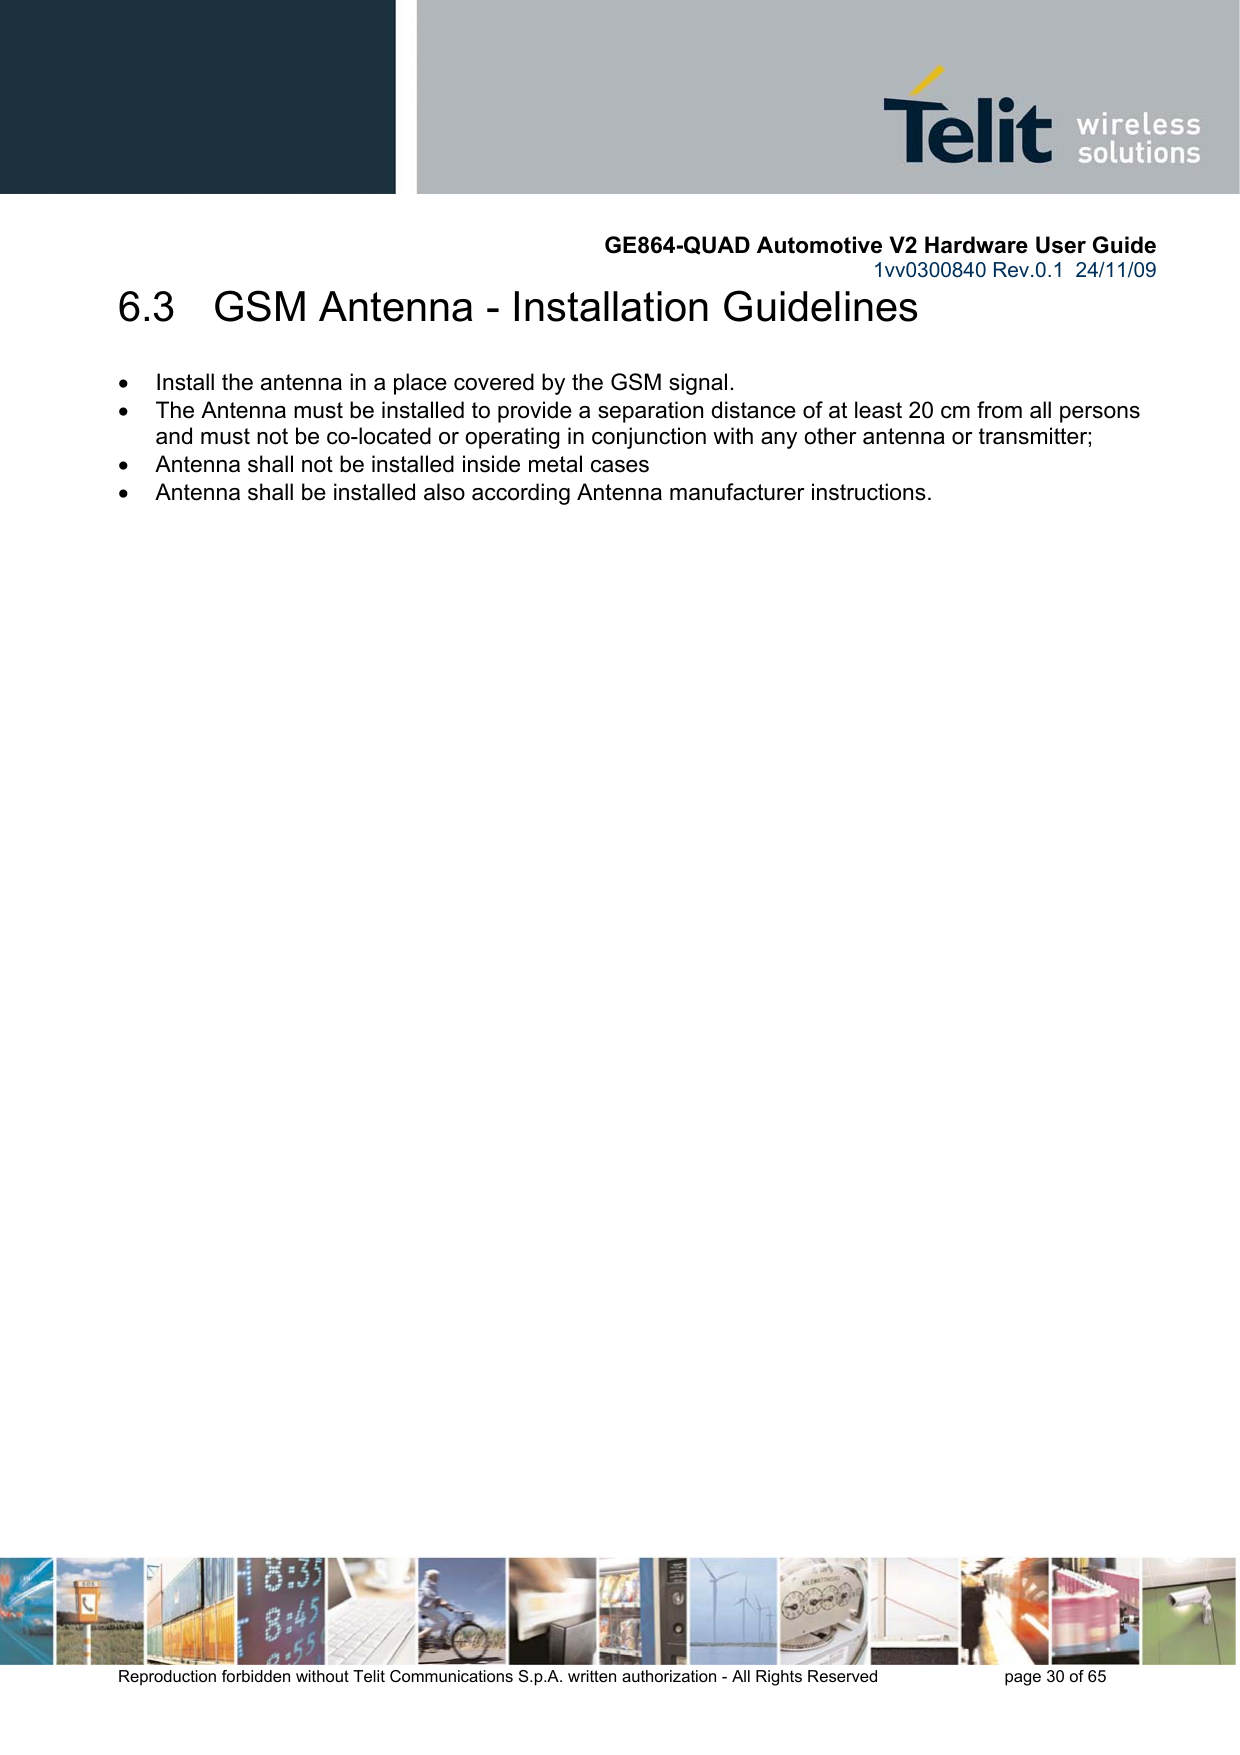       GE864-QUAD Automotive V2 Hardware User Guide 1vv0300840 Rev.0.1  24/11/09      Reproduction forbidden without Telit Communications S.p.A. written authorization - All Rights Reserved    page 30 of 65  6.3   GSM Antenna - Installation Guidelines •  Install the antenna in a place covered by the GSM signal. •  The Antenna must be installed to provide a separation distance of at least 20 cm from all persons and must not be co-located or operating in conjunction with any other antenna or transmitter; •  Antenna shall not be installed inside metal cases  •  Antenna shall be installed also according Antenna manufacturer instructions.     